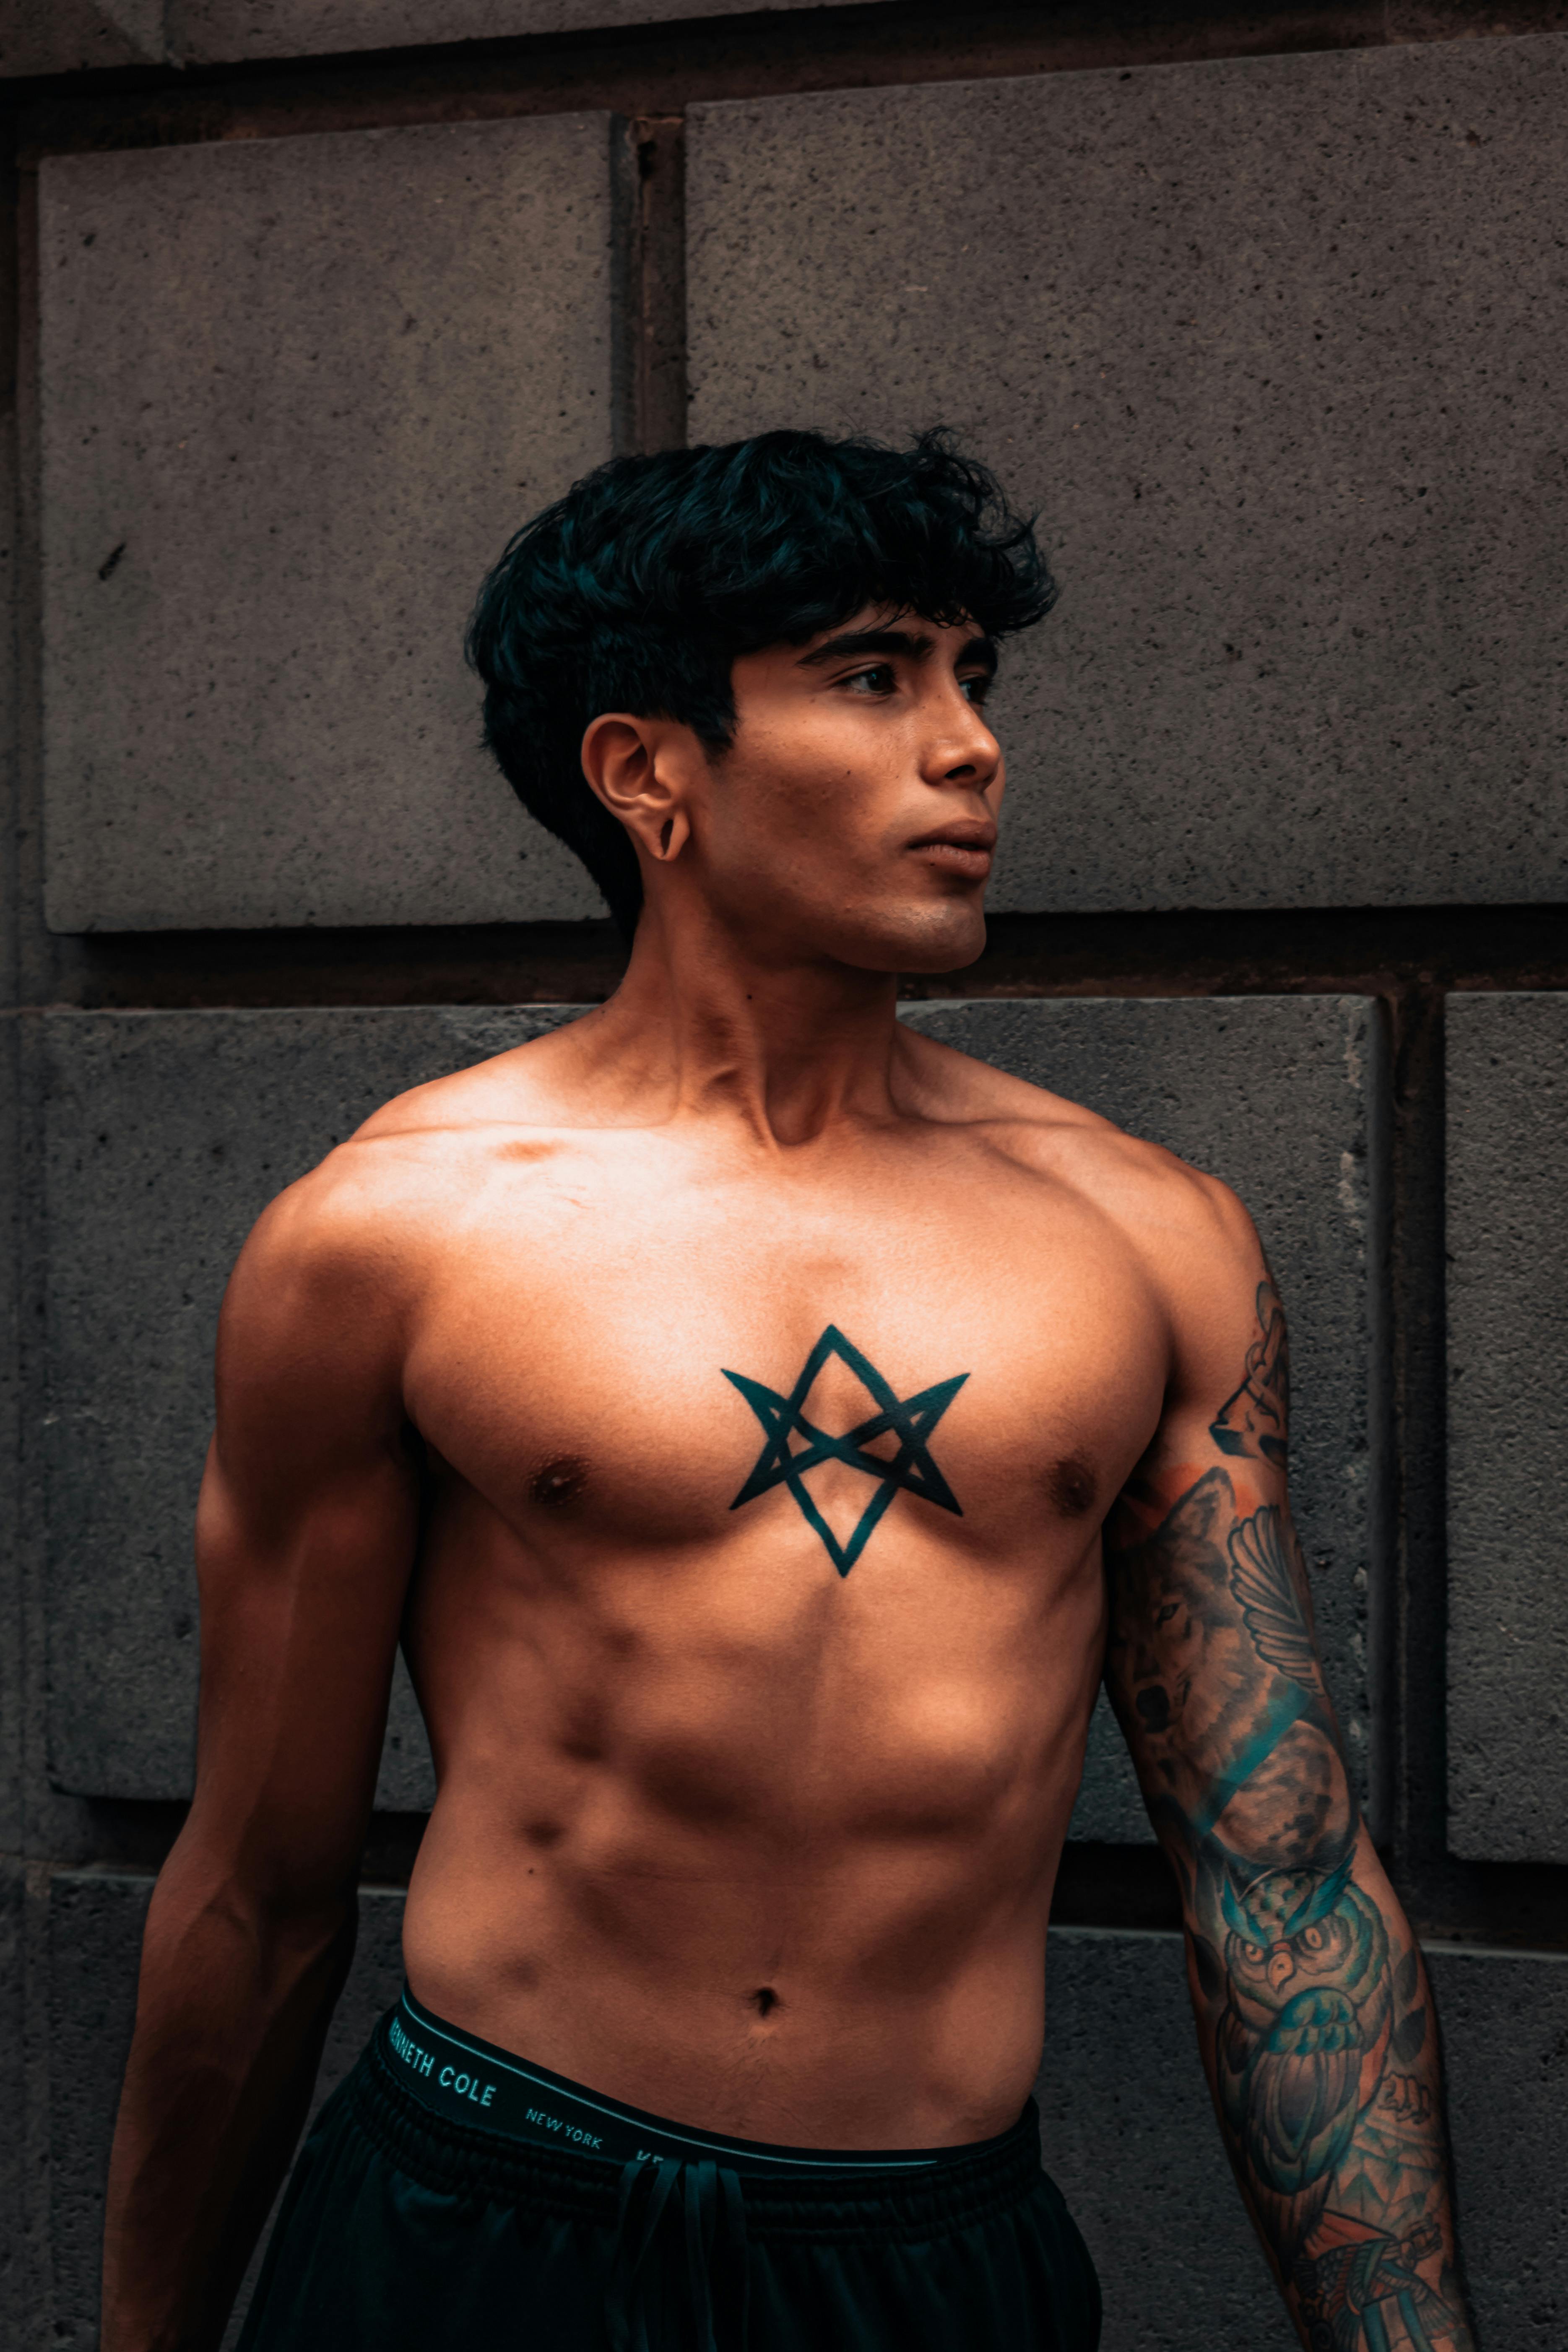 Cross With Wings Tattoo On Man Chest